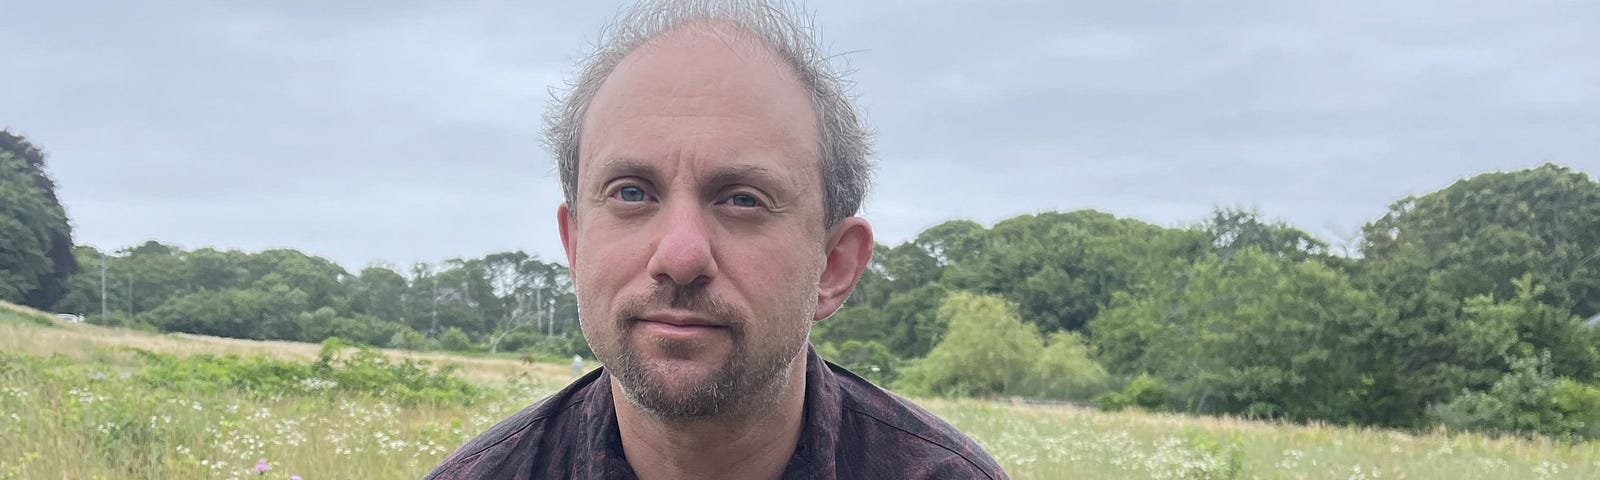 Tucker Lieberman, age 44, bald and with a goatee, crouched in a grassy meadow with white flowers and trees in the background. Wearing a collared shirt, red exercise pants, sneakers.